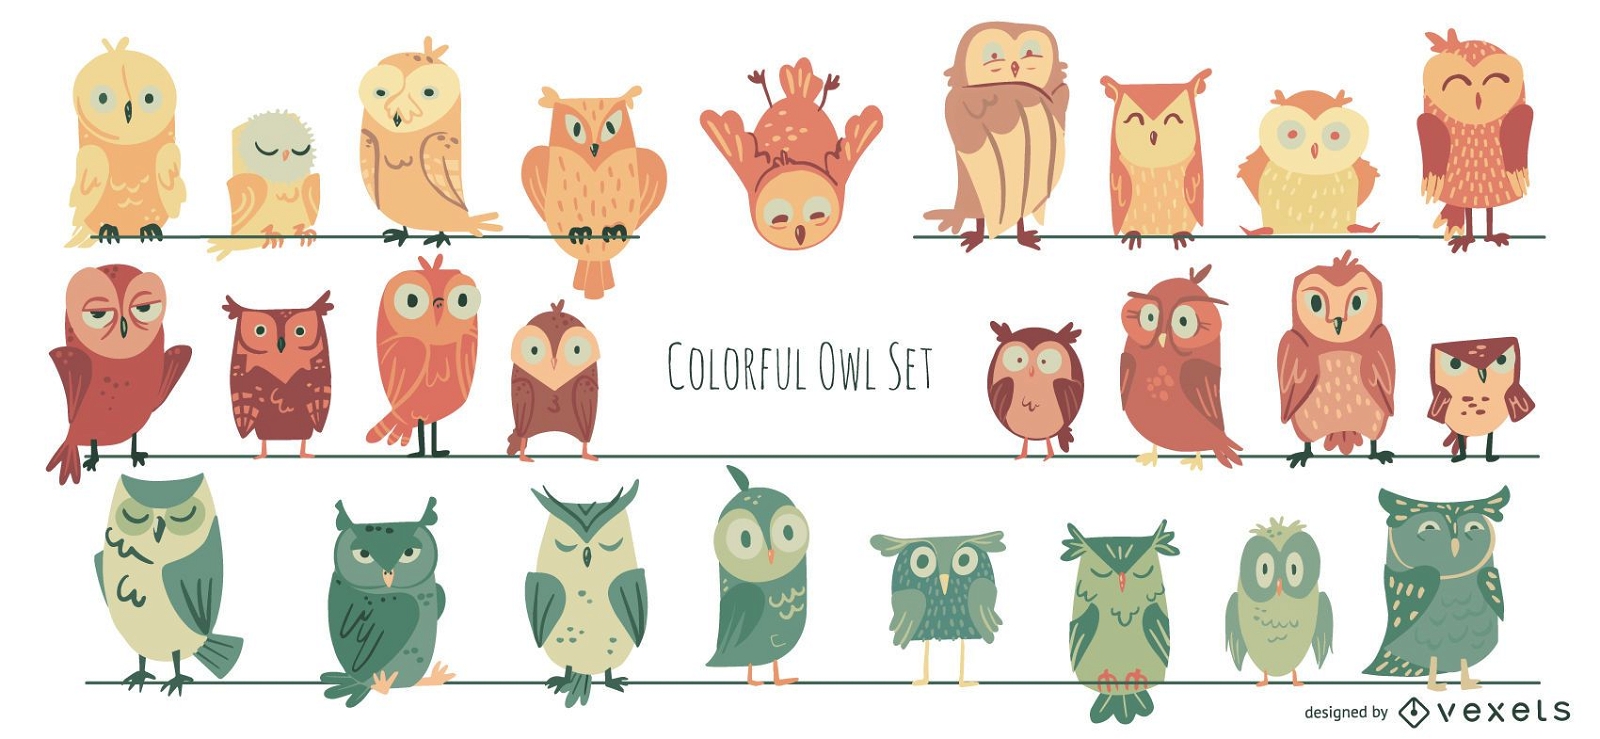 Colorful Owl Illustration Collection